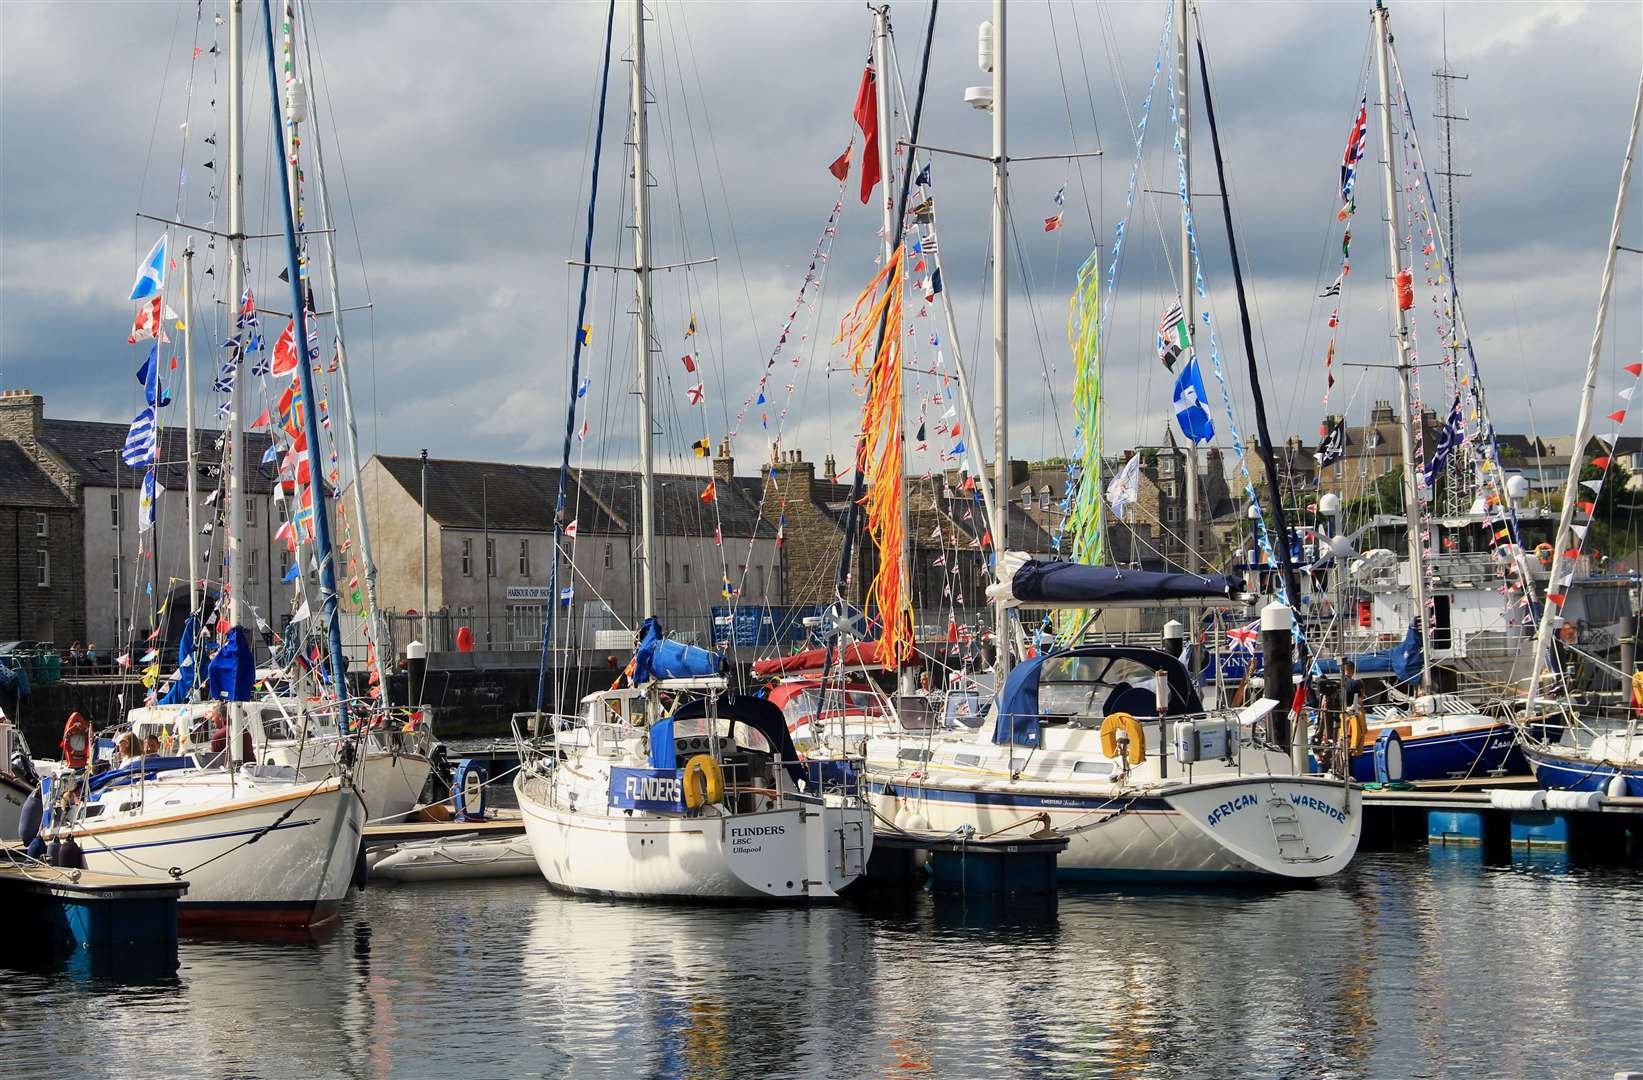 Colourful flags on the yachts added to the spectacle at Wick harbour. Picture: Alan Hendry